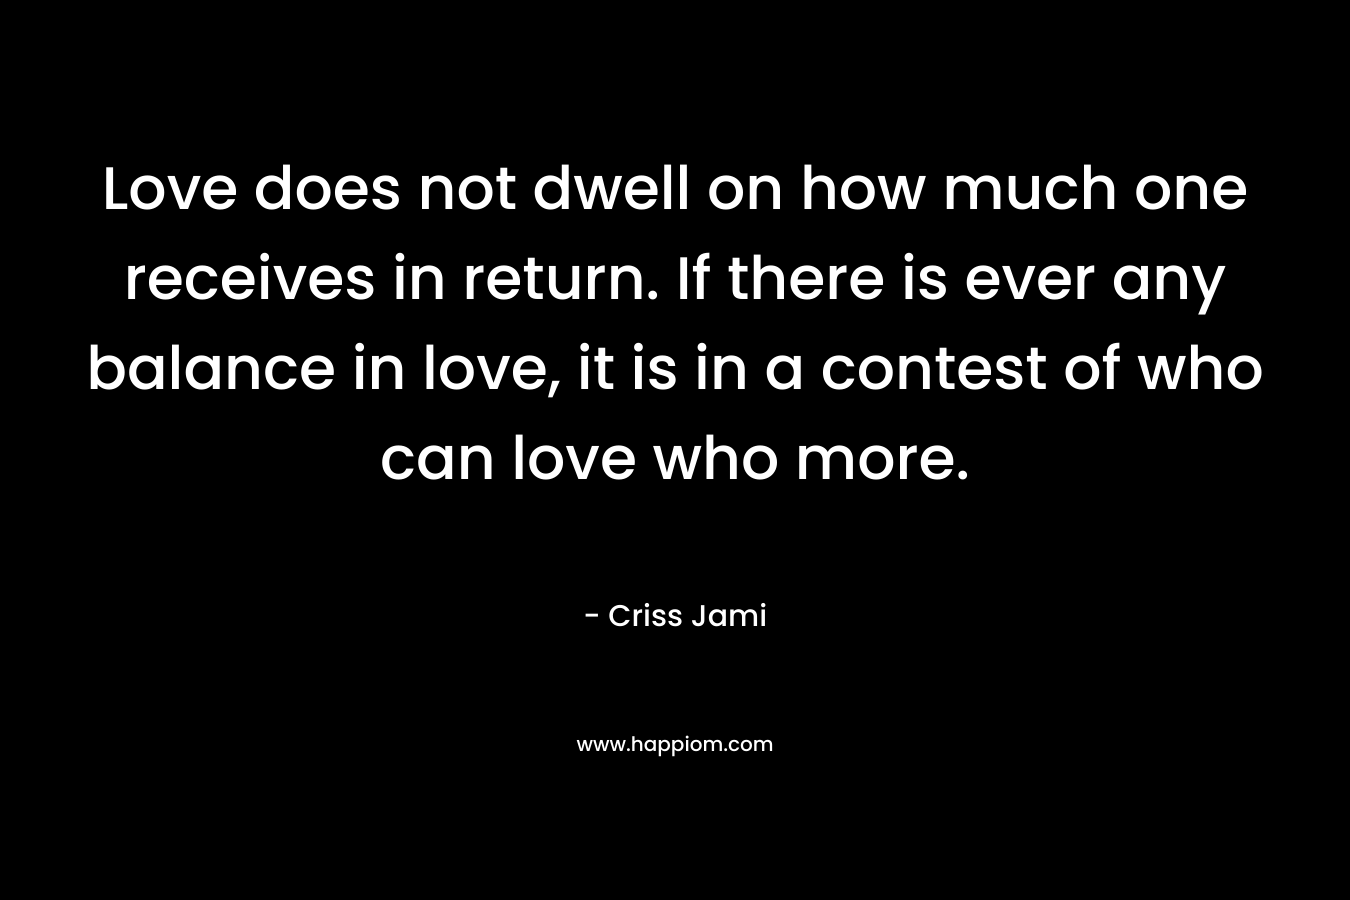 Love does not dwell on how much one receives in return. If there is ever any balance in love, it is in a contest of who can love who more. – Criss Jami